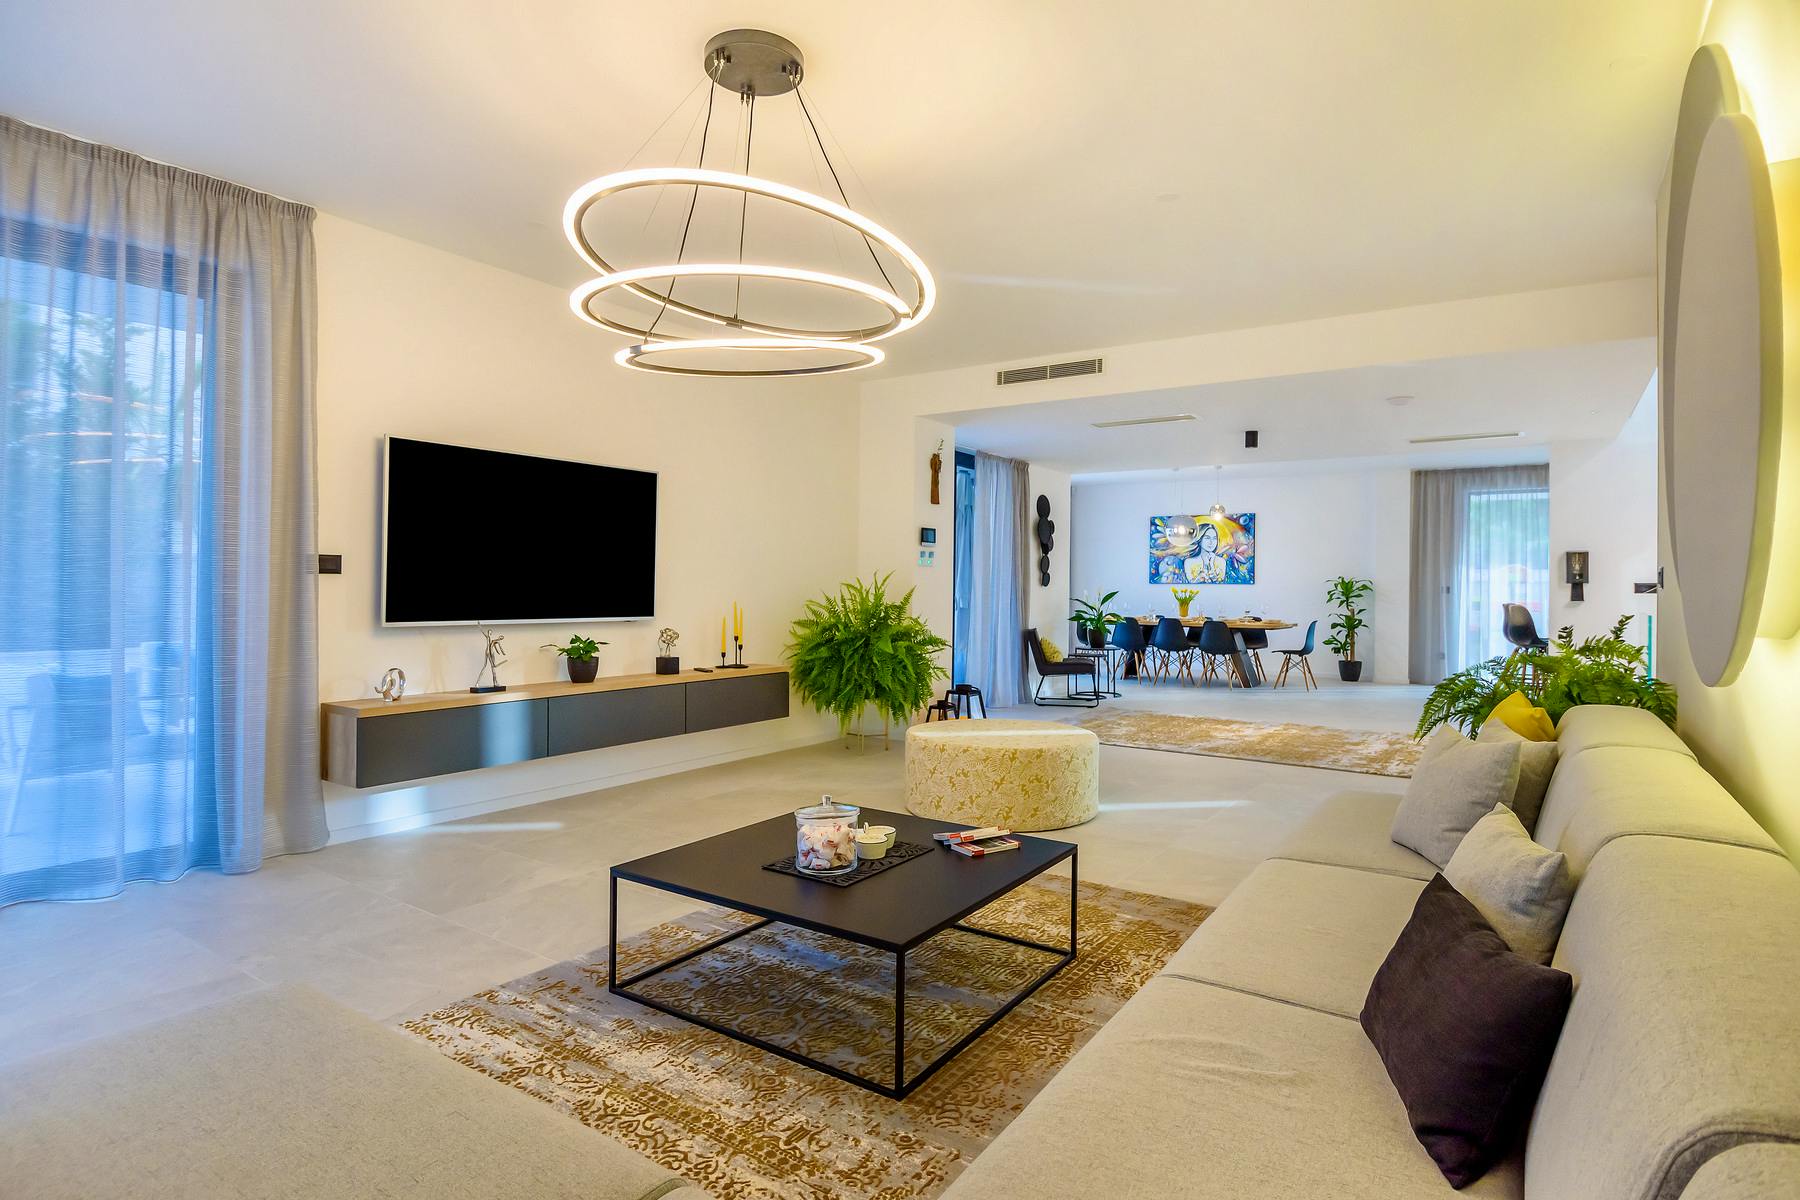 Comfortable living room with modern amenities